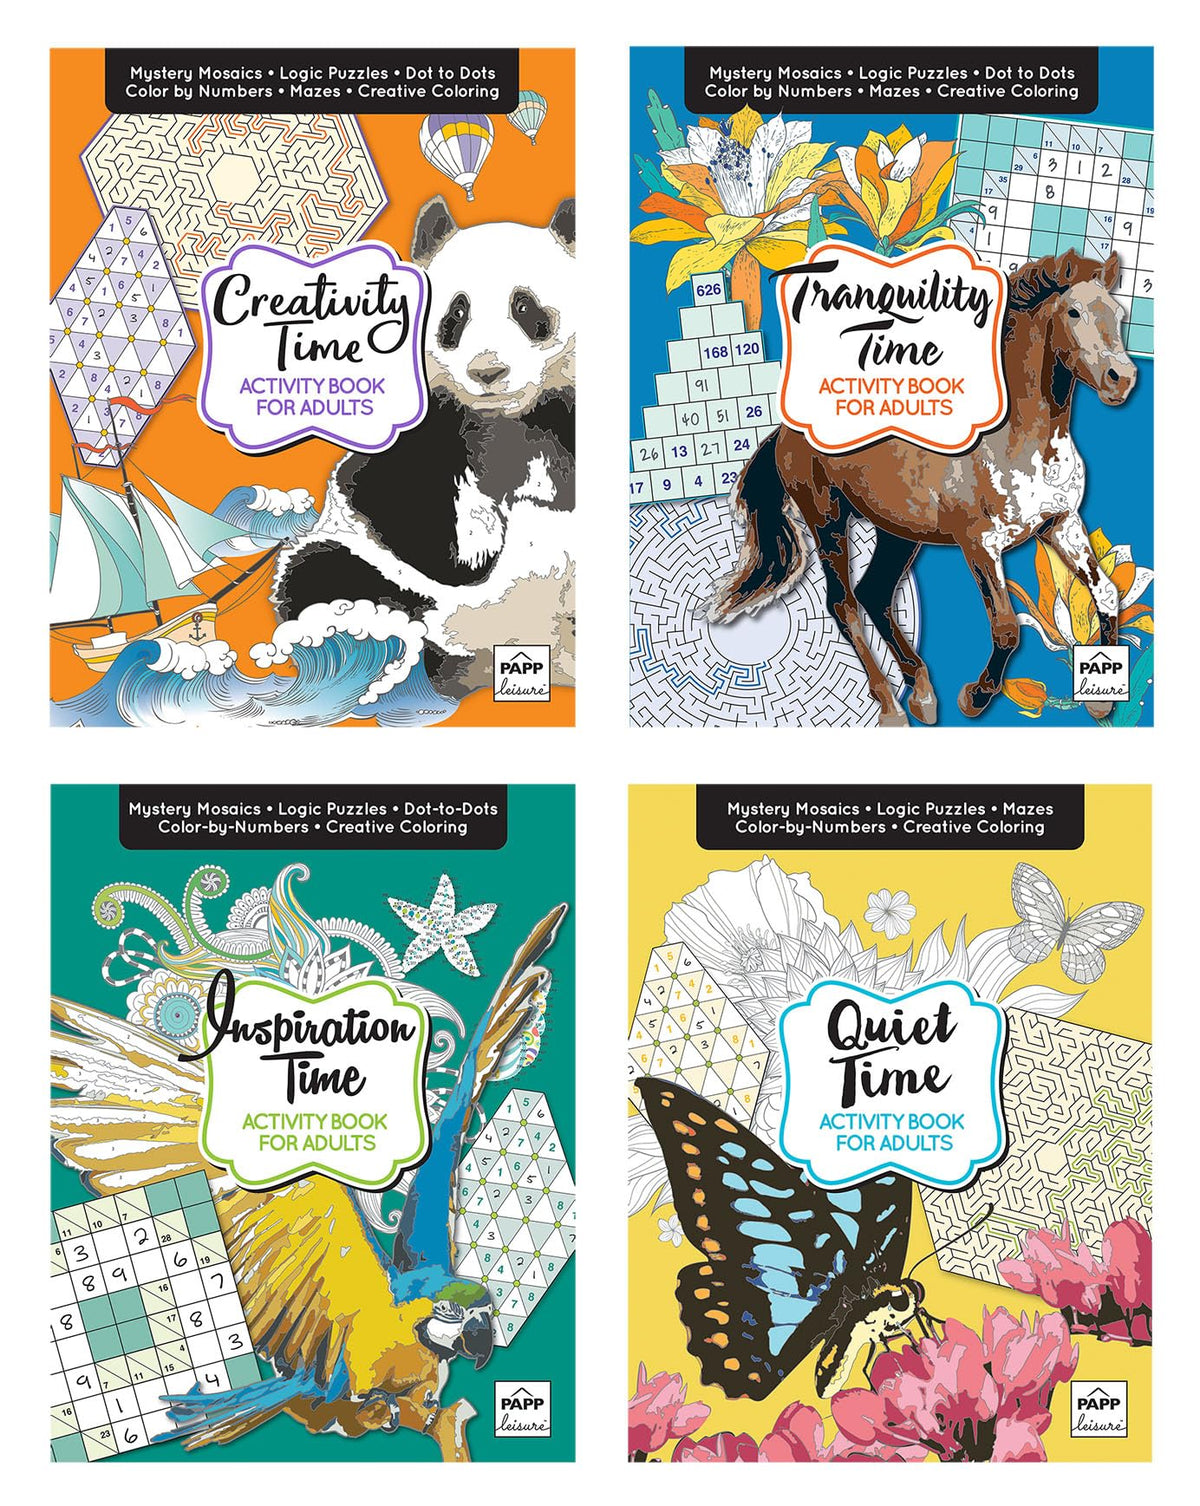 Activity Books for Adults, 4 Volume Set with Over 100 Pages of Stress-Relieving Activities Like Sudoku, Color by Number, Mosaics, and Inspirational Quotes